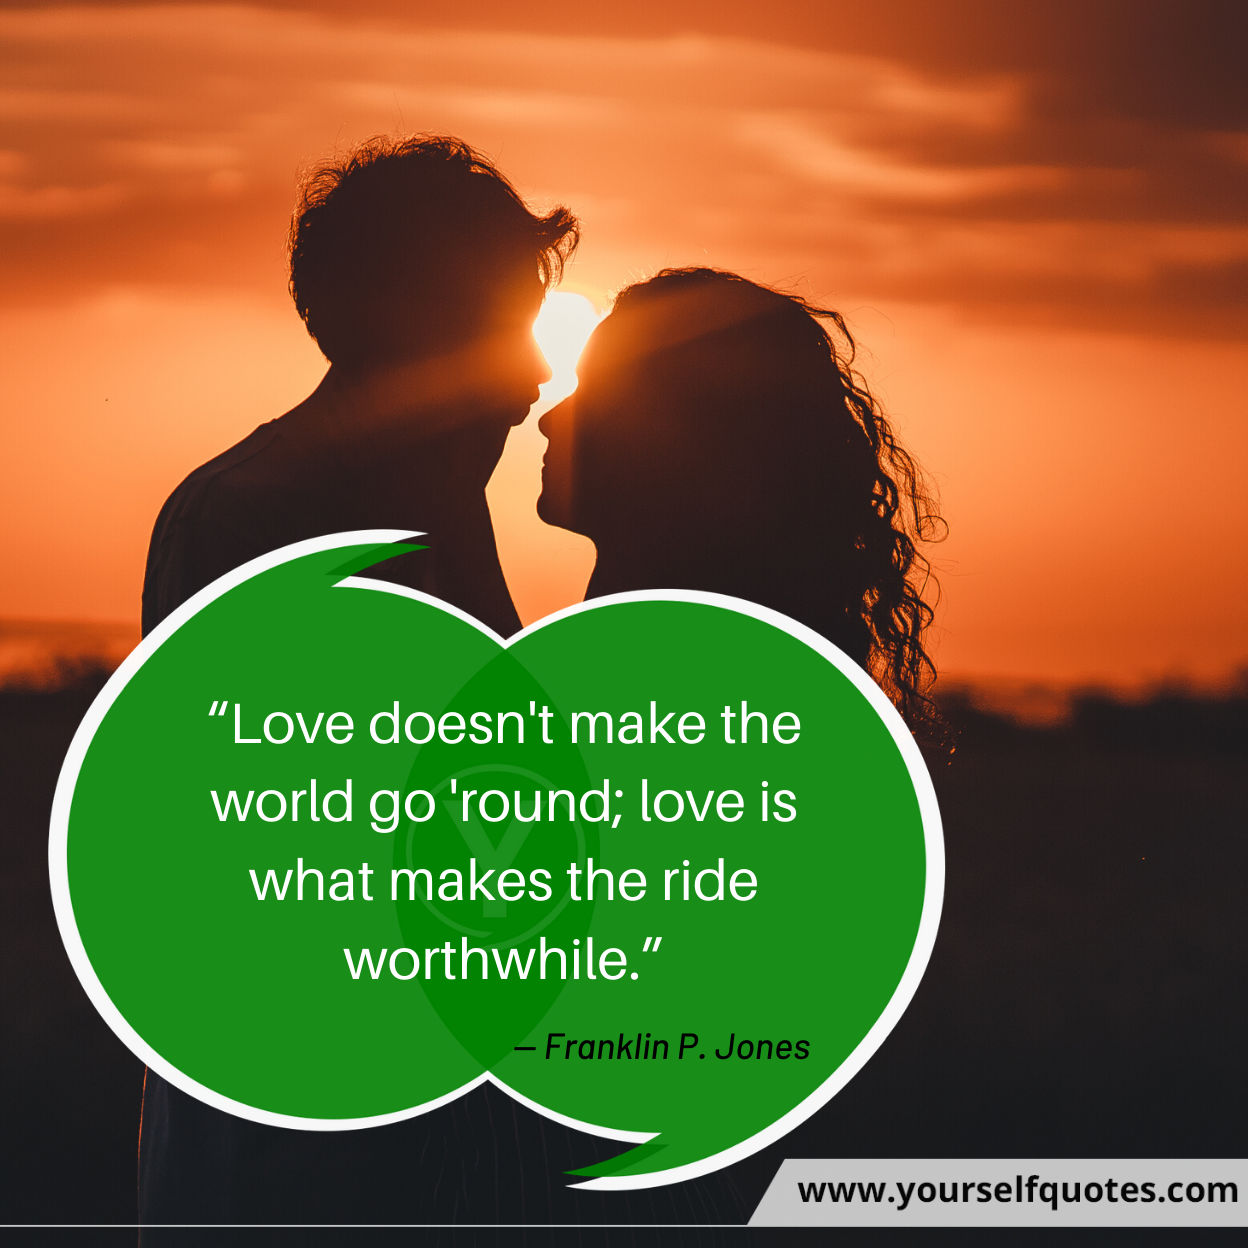 Quotes on Love by Franklin P. Jones